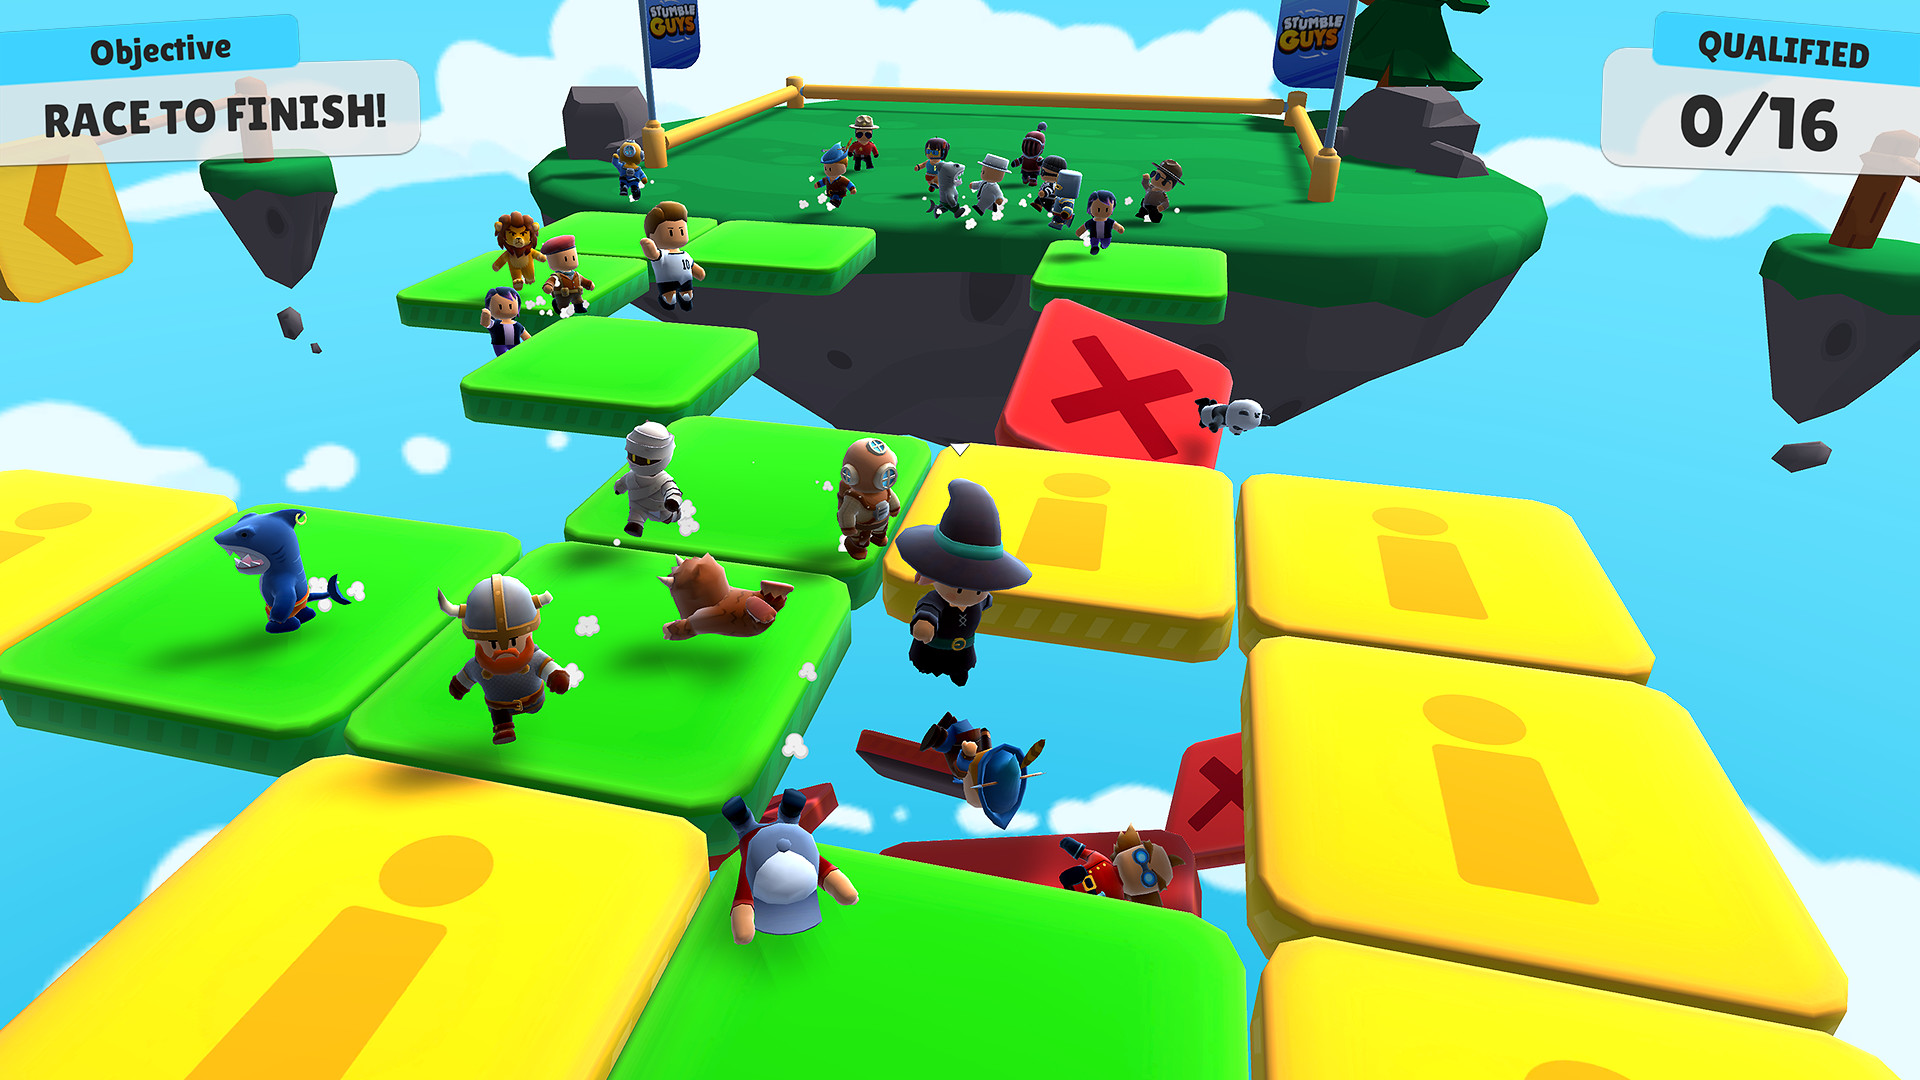 Stumble guys is a battle Royal type video game developed by Kitka games  from Finland. Released in the year of September 24, 2020. Spread the whole  world Stumble guys like to play